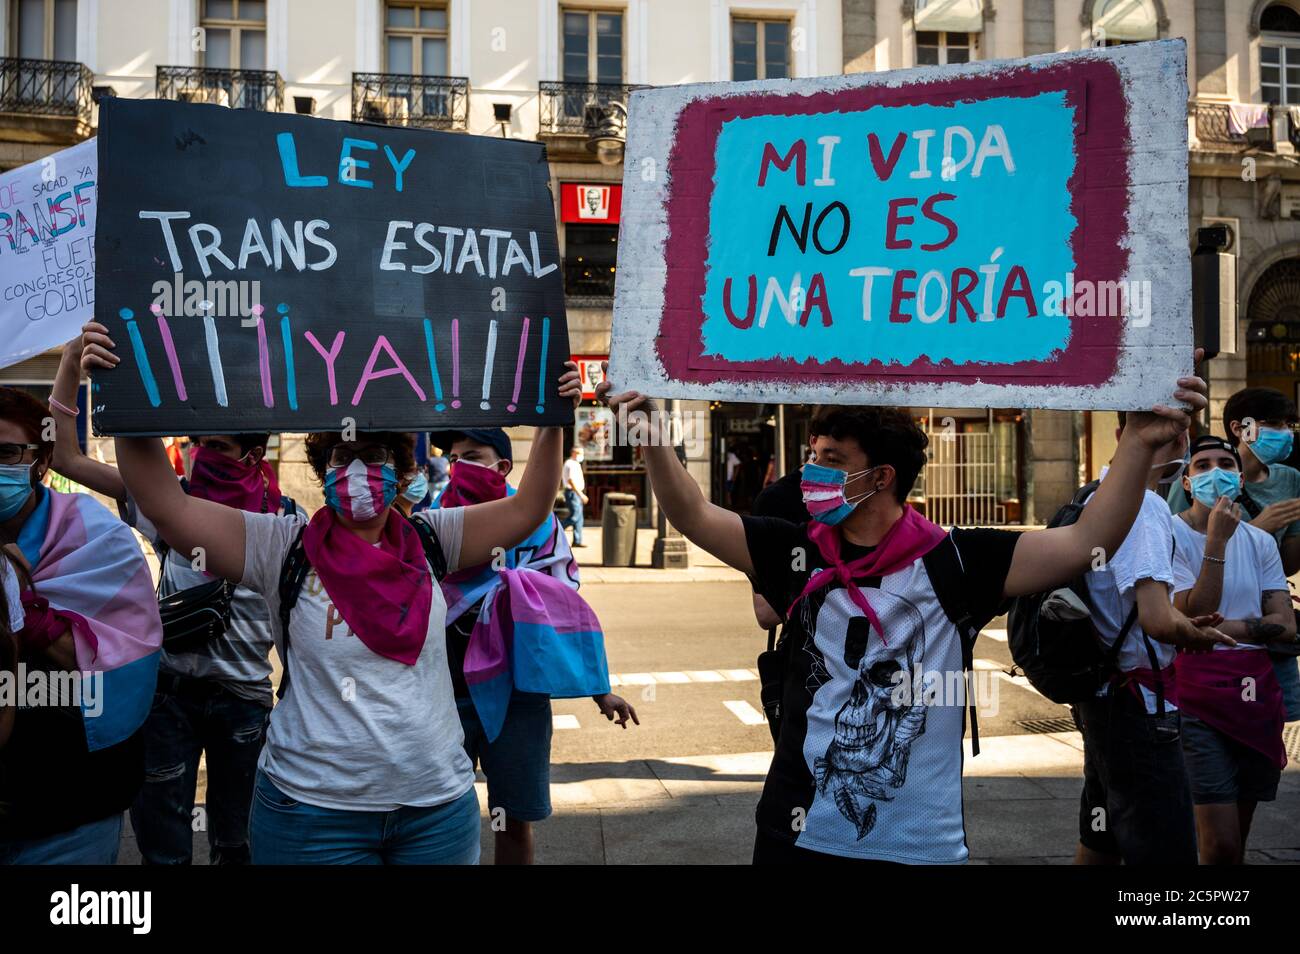 Madrid, Spain. 04th July, 2020. Demonstrators carrying placards attend a protest where Trans community demand a state law that will guarantee gender self-determination. The protest coincides with the Pride celebrations that are taking place this week. Credit: Marcos del Mazo/Alamy Live News Stock Photo